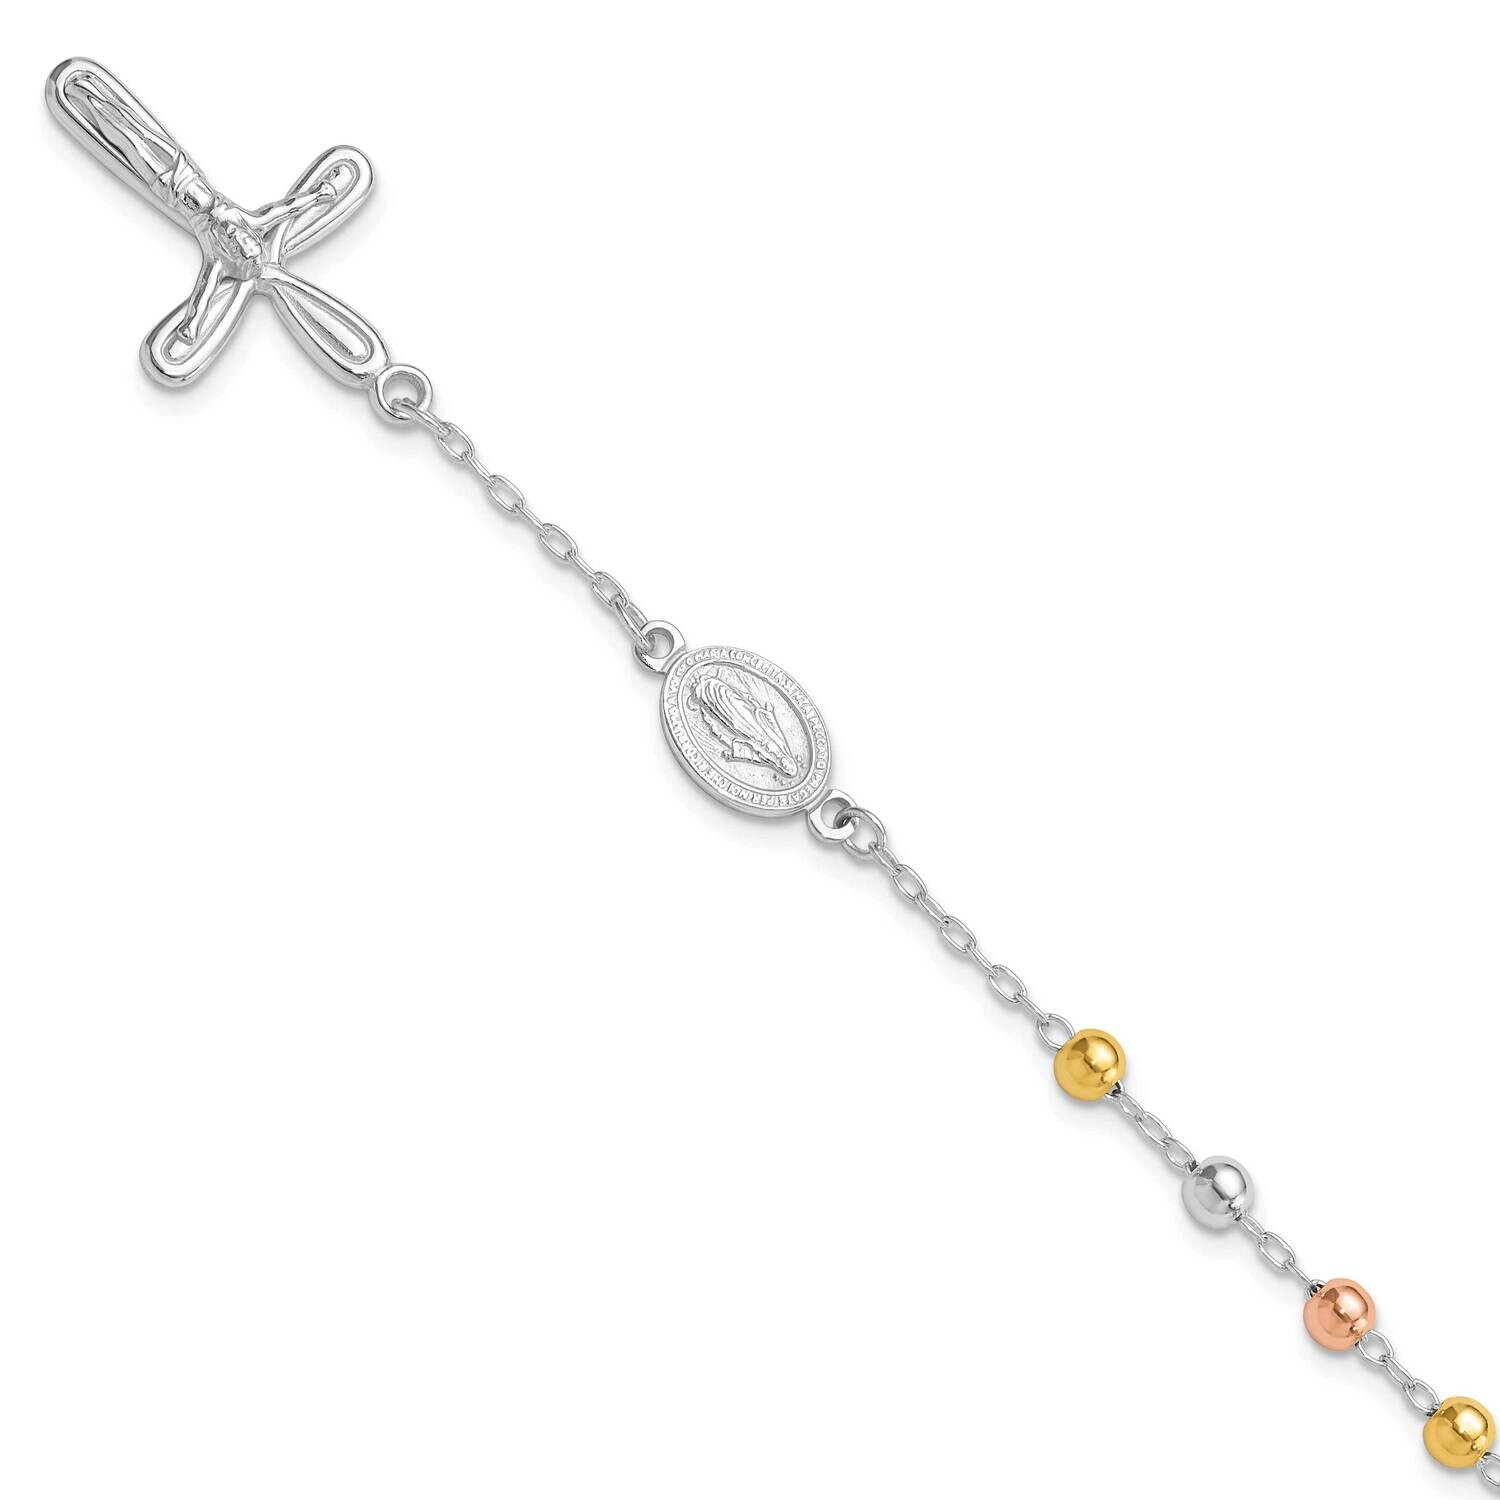 Rh-Plated Rose Gold-Tone Cross Rosary Bracelet 7.5 Inch Sterling Silver QG6384-7.5